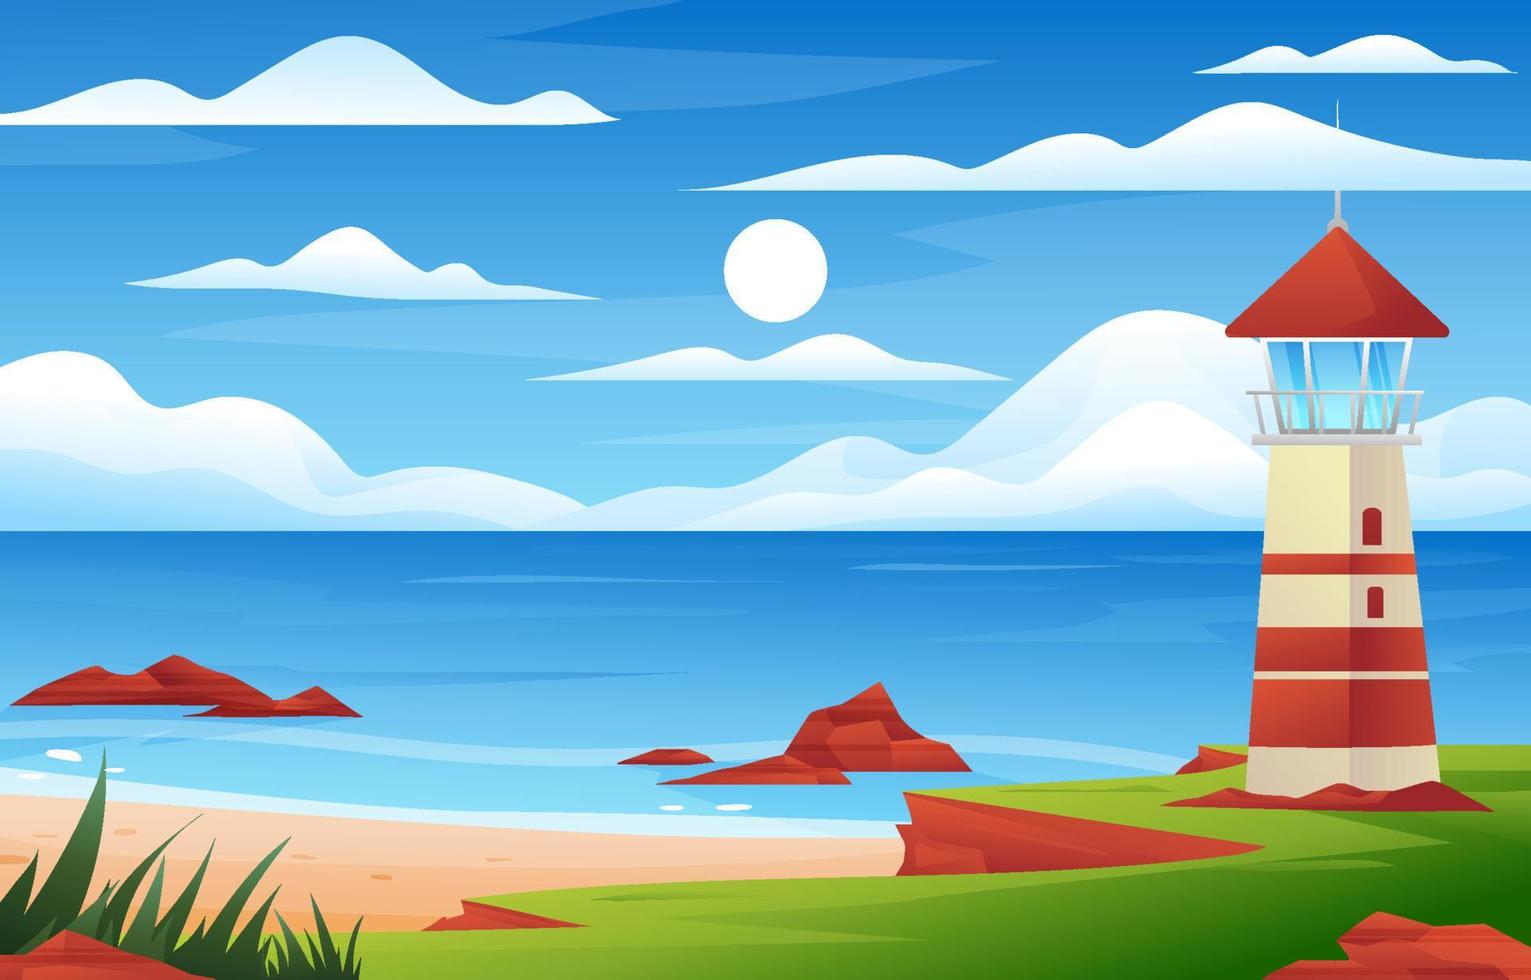 Background of Beach Scenery Landscape vector